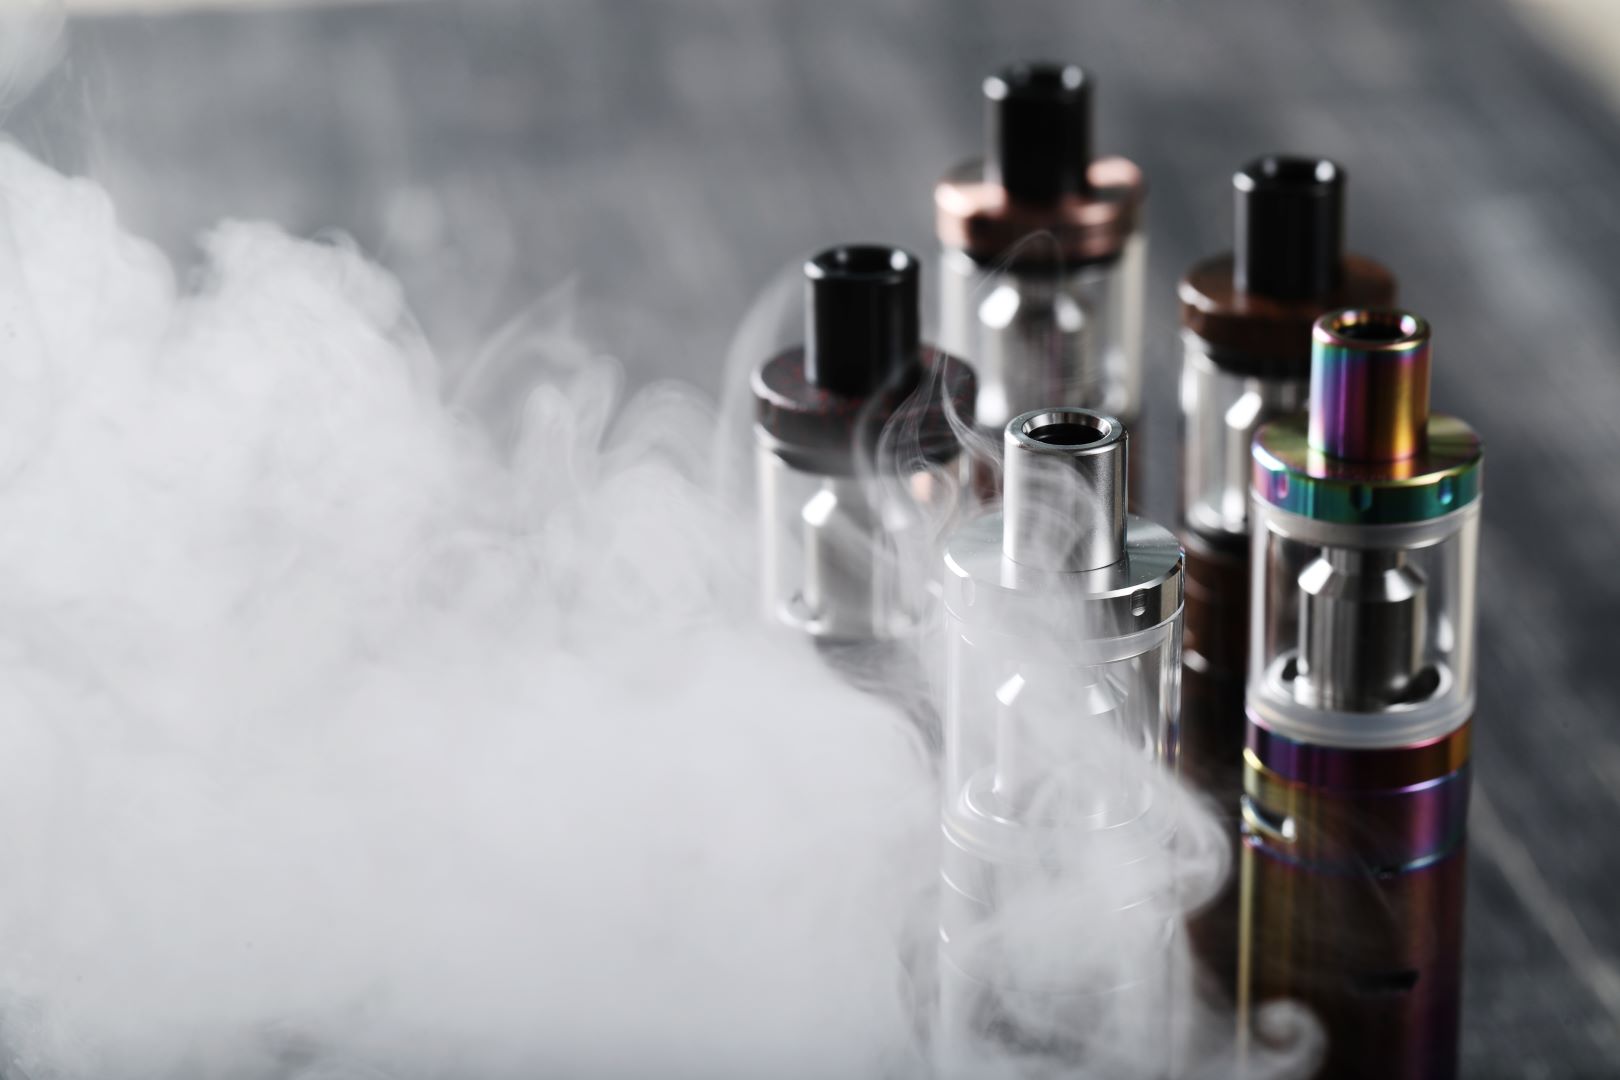 A photo of a vaping device on the wooden table